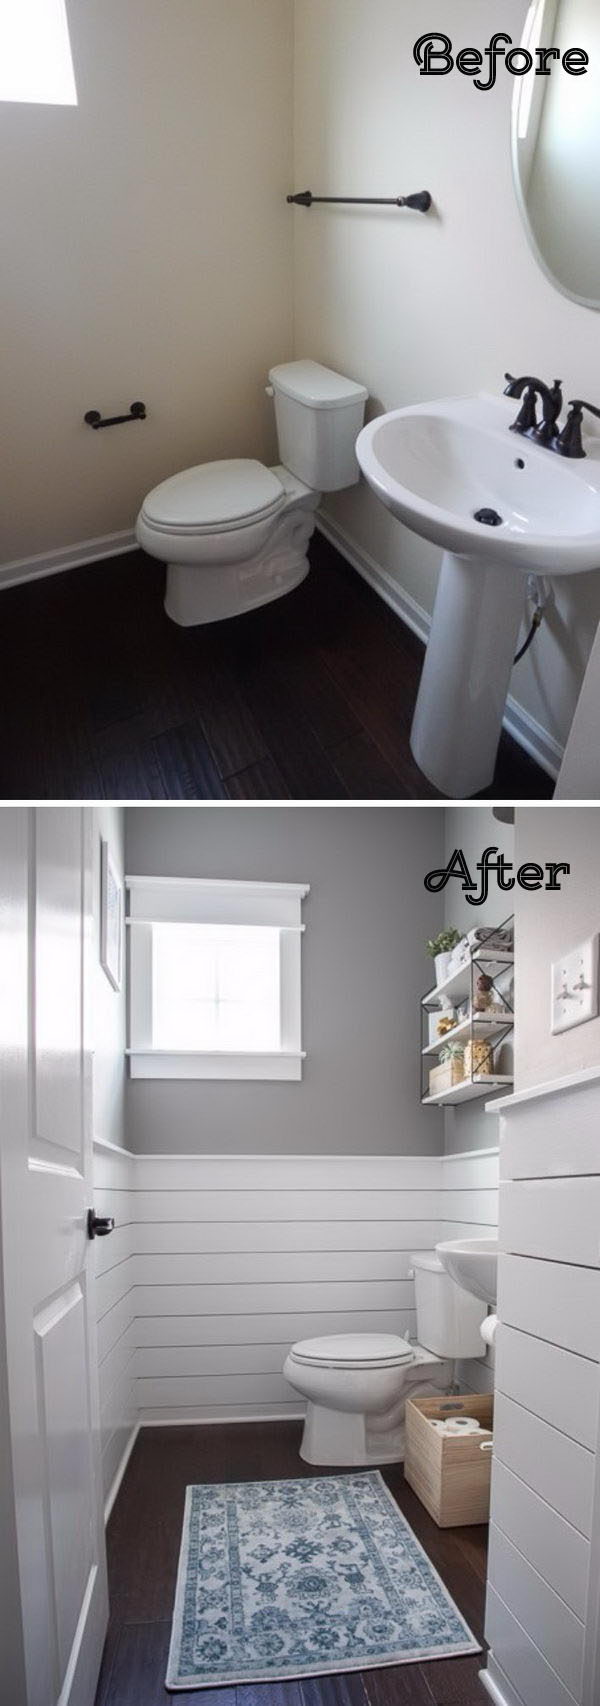 Update a Plain Bathroom By Making a Crisp Contrast Between The White Shiplap and The Light Gray Walls . 